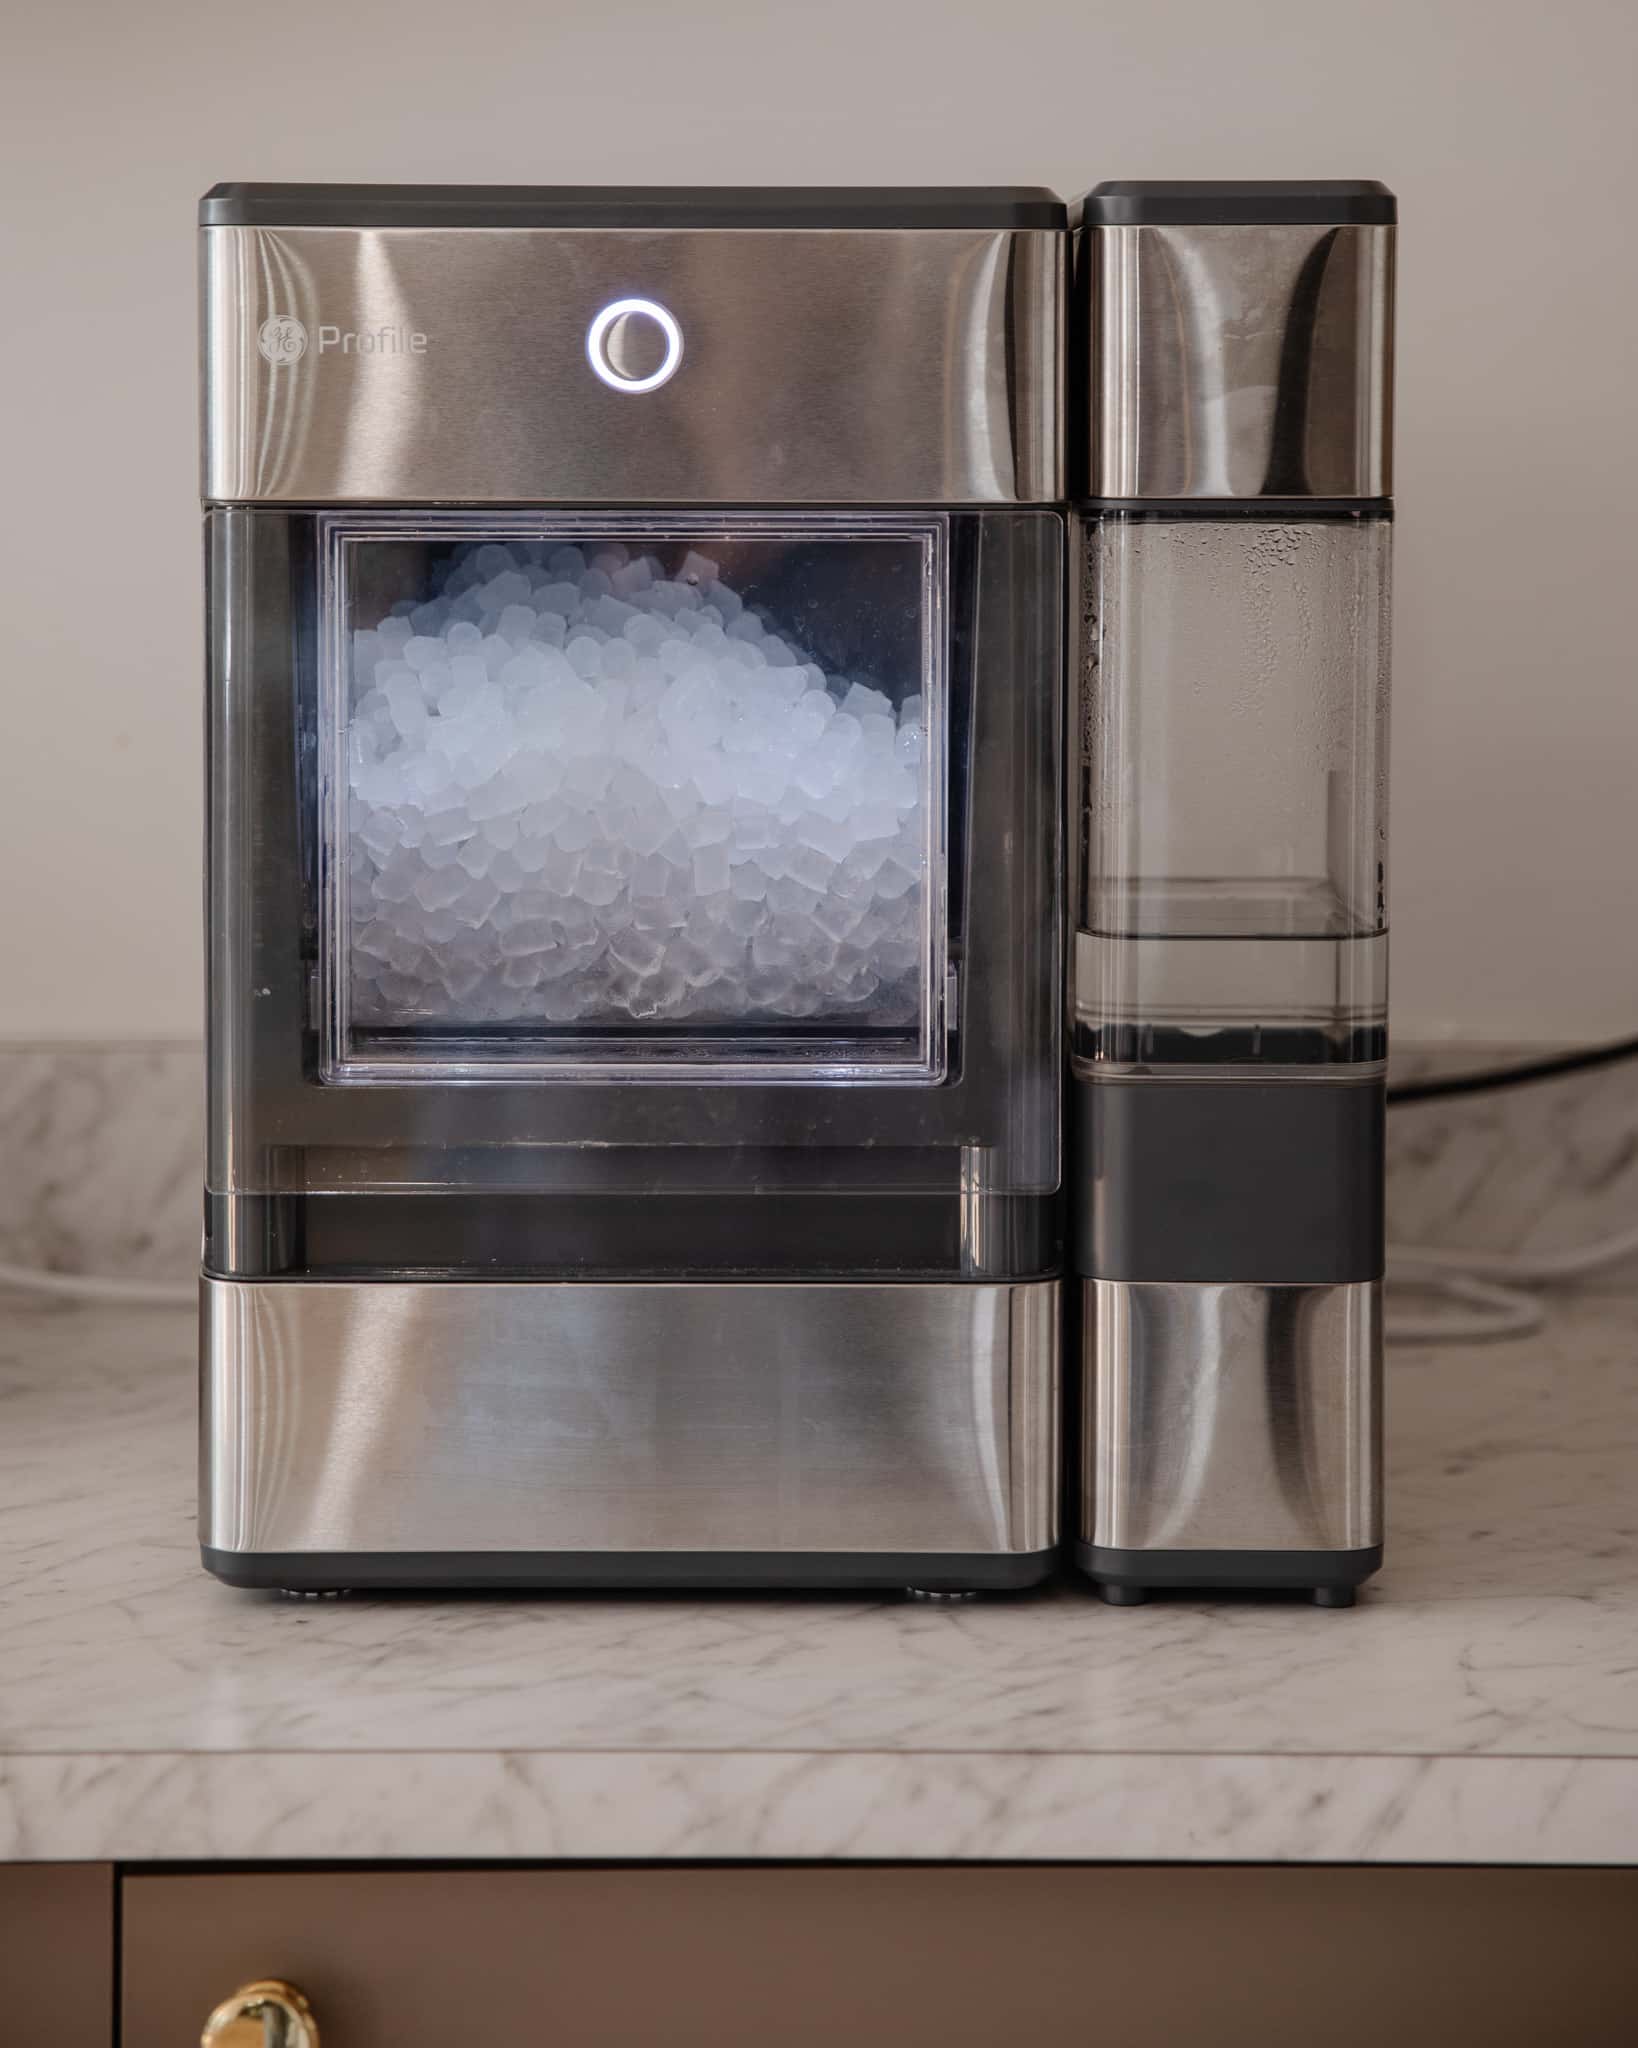 A Nugget Ice Maker For Home — My Very Own Sonic Ice Maker!